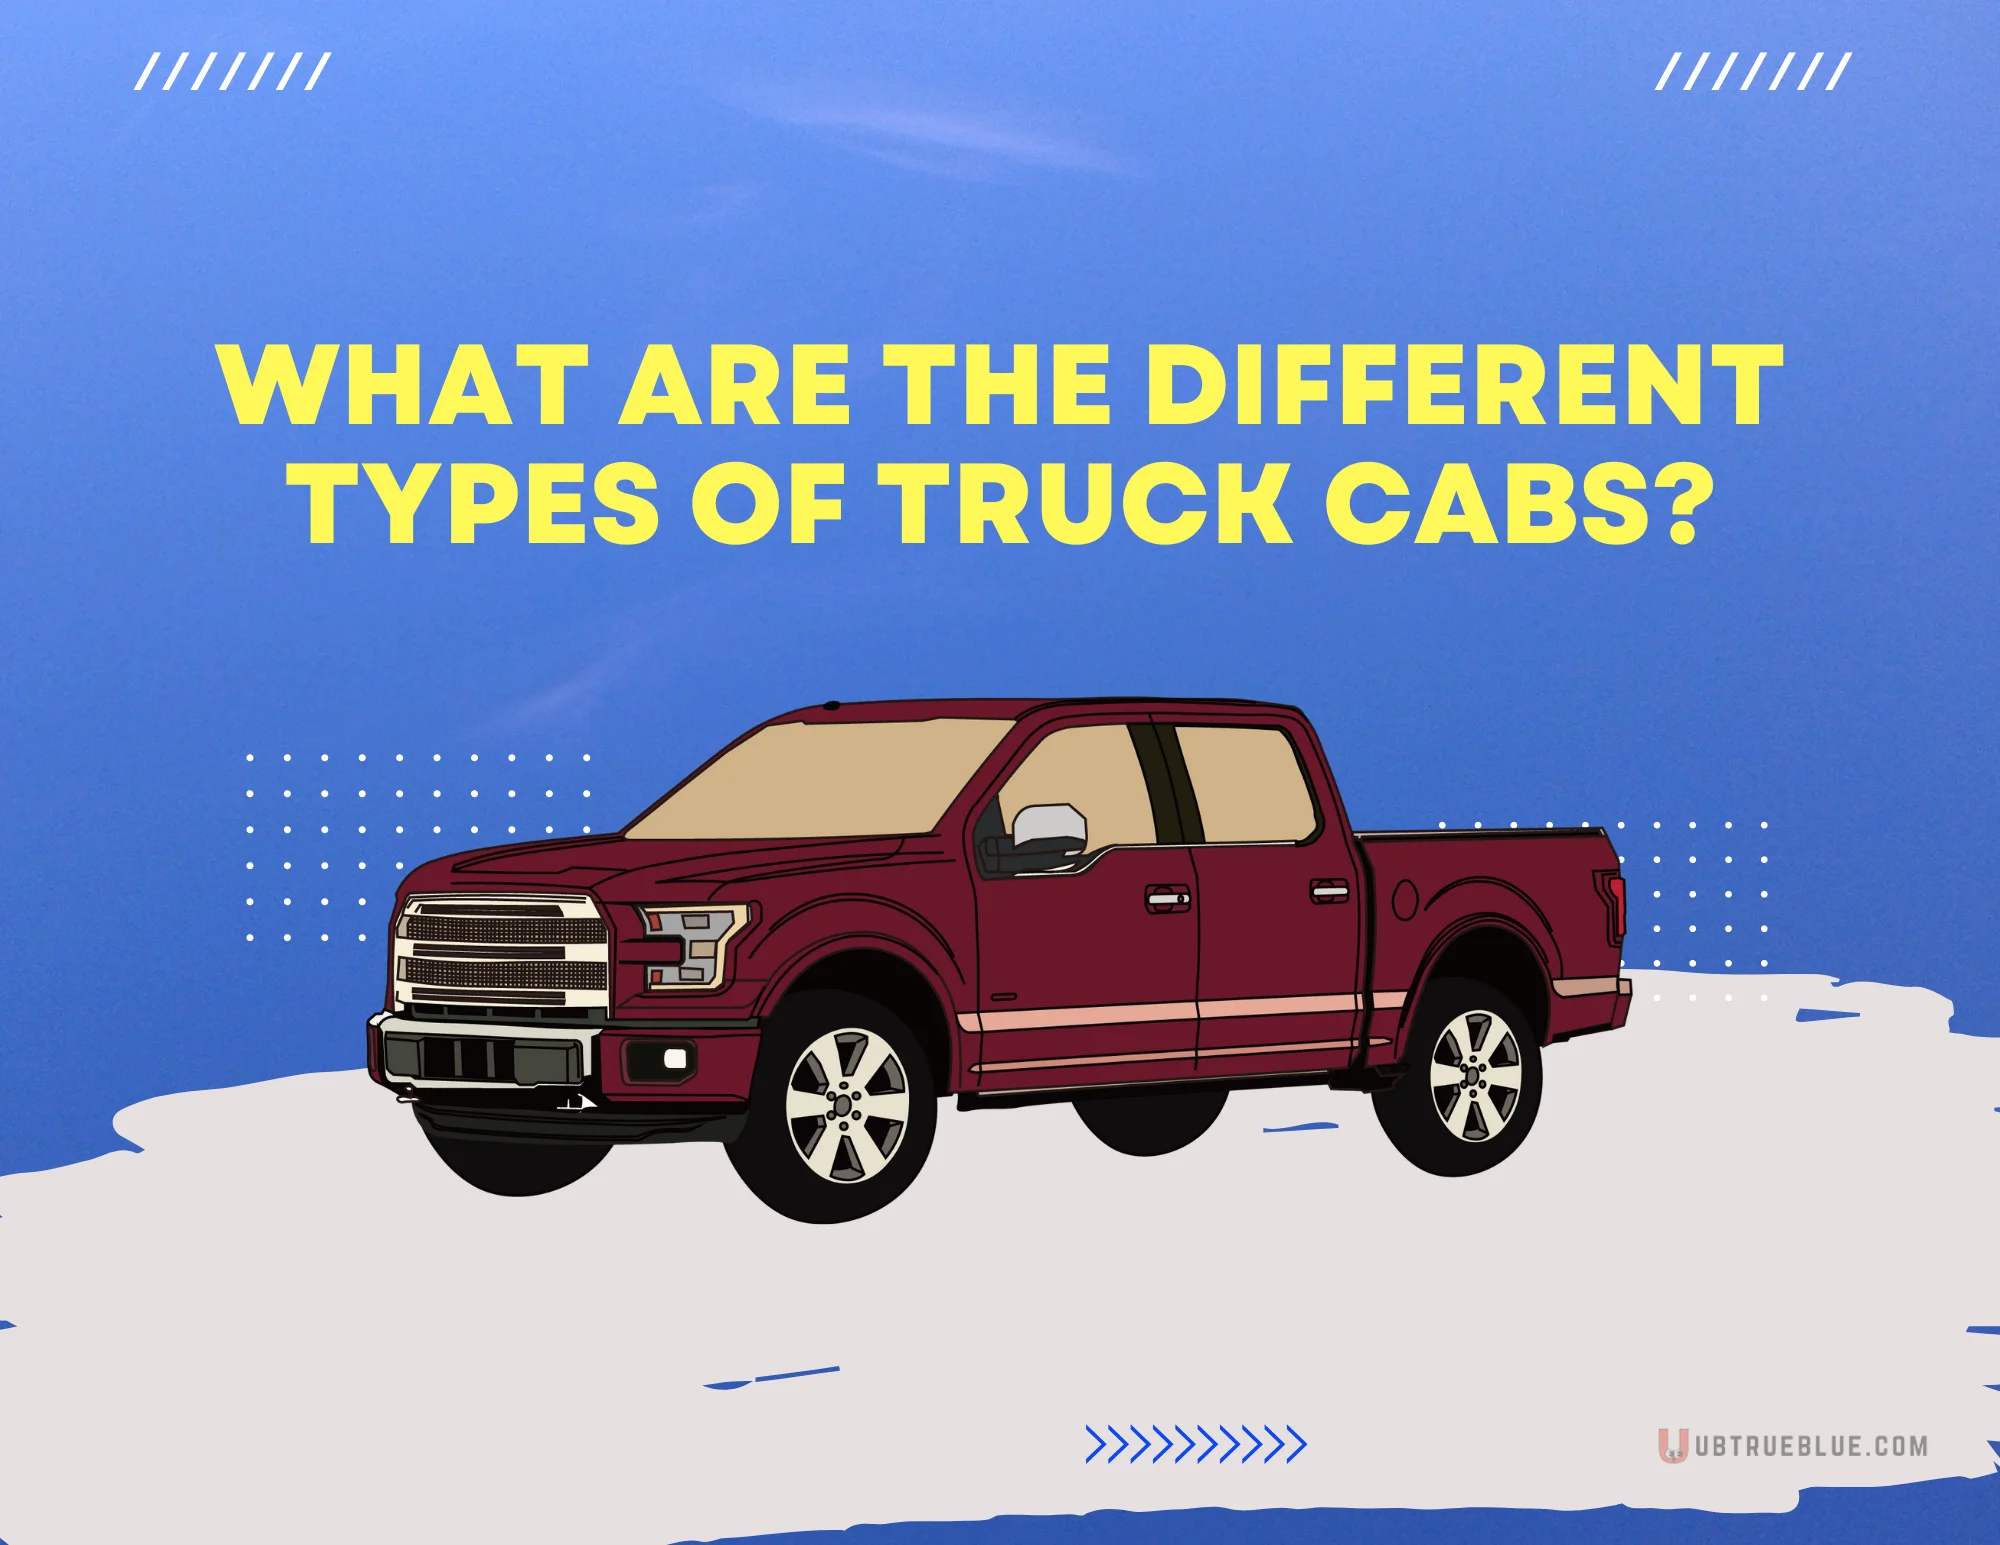 Types Of Truck Cabs Ubtrueblue Automotive What Are The Different Cabs? Extended Cab Semi Double Crew Regular  Full